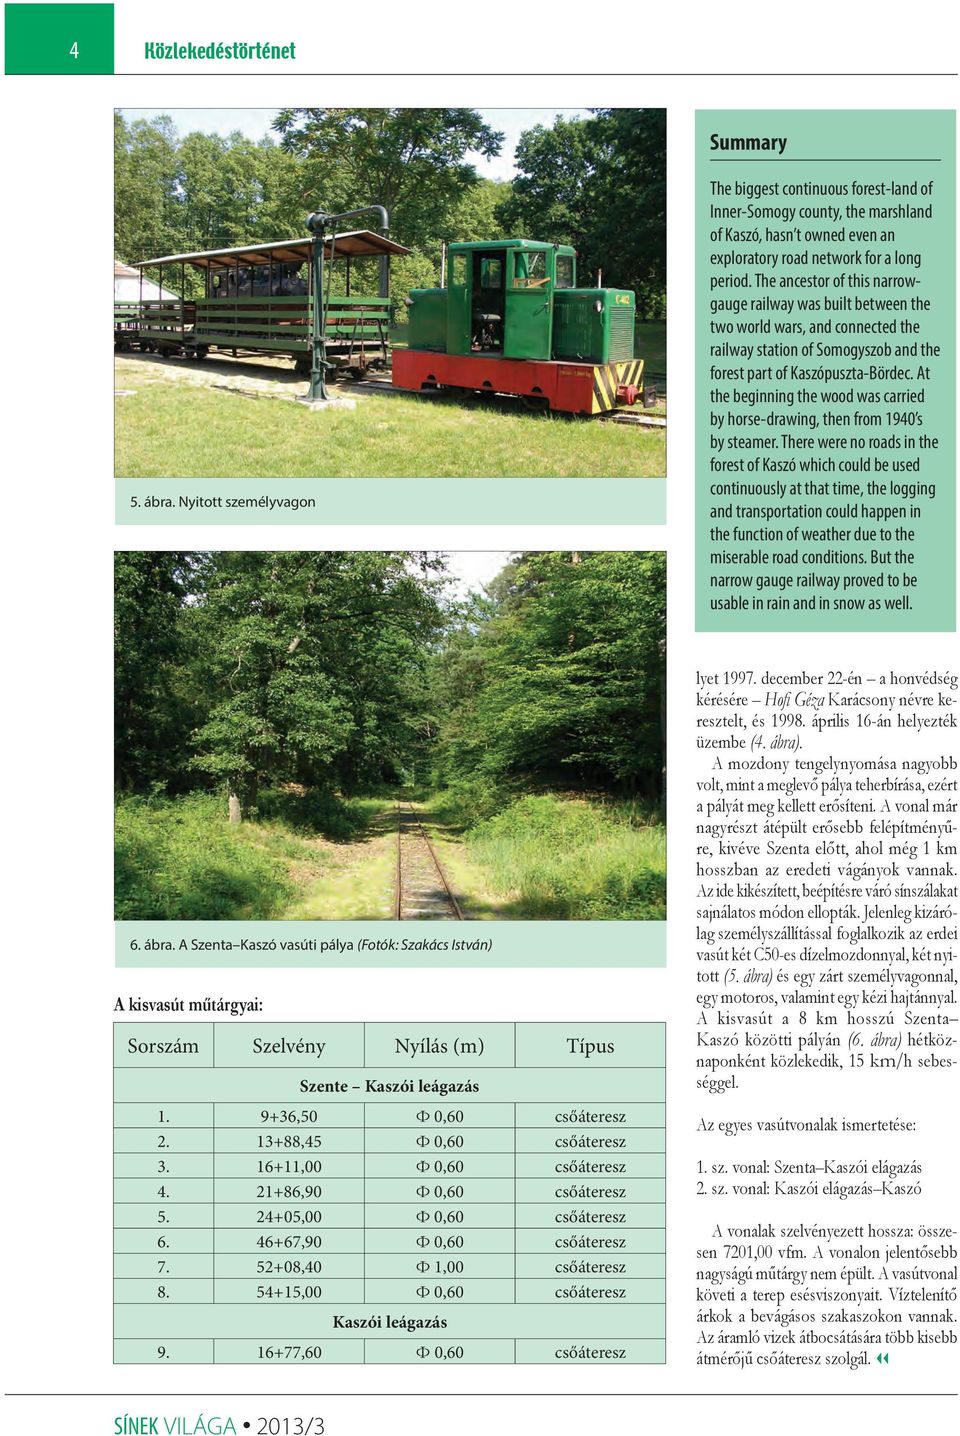 The ancestor of this narrowgauge railway was built between the two world wars, and connected the railway station of Somogyszob and the forest part of Kaszópuszta-Bördec.